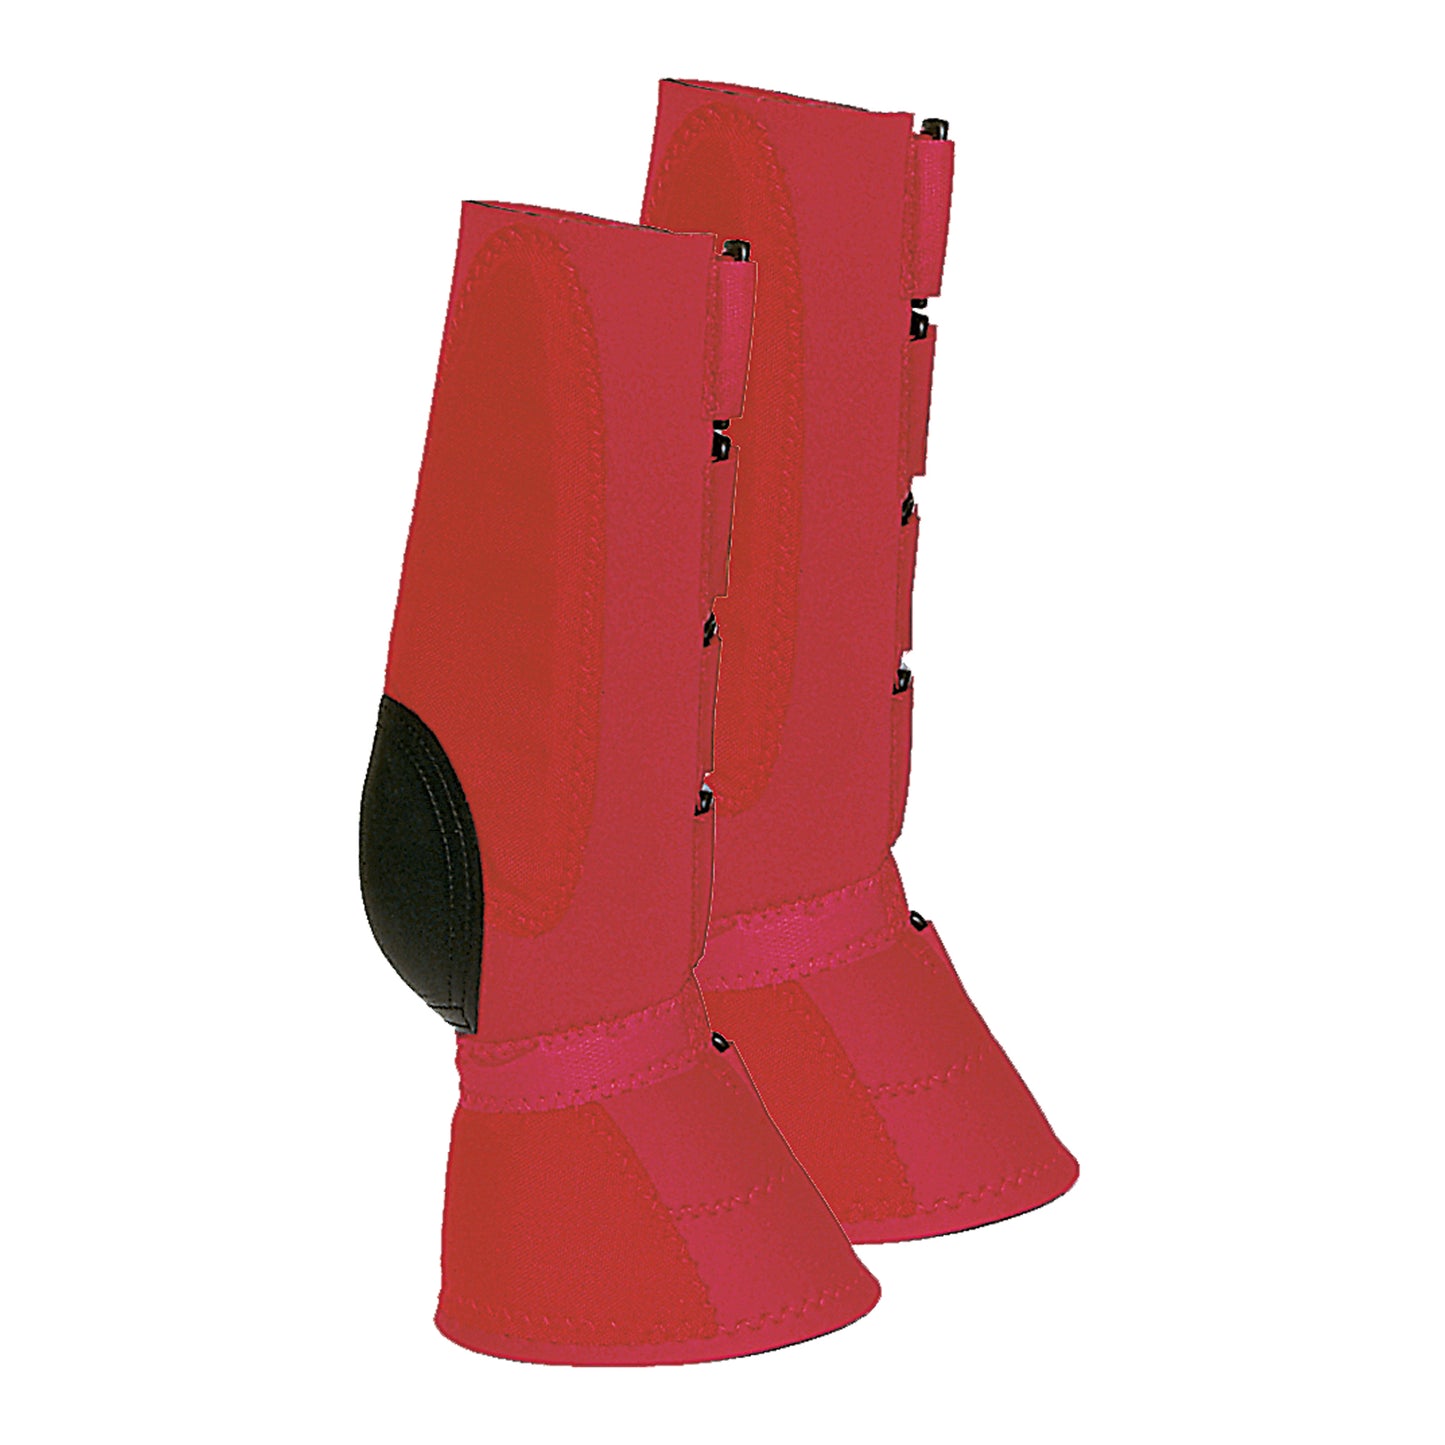 Deluxe 4-in-1 Combination Boots